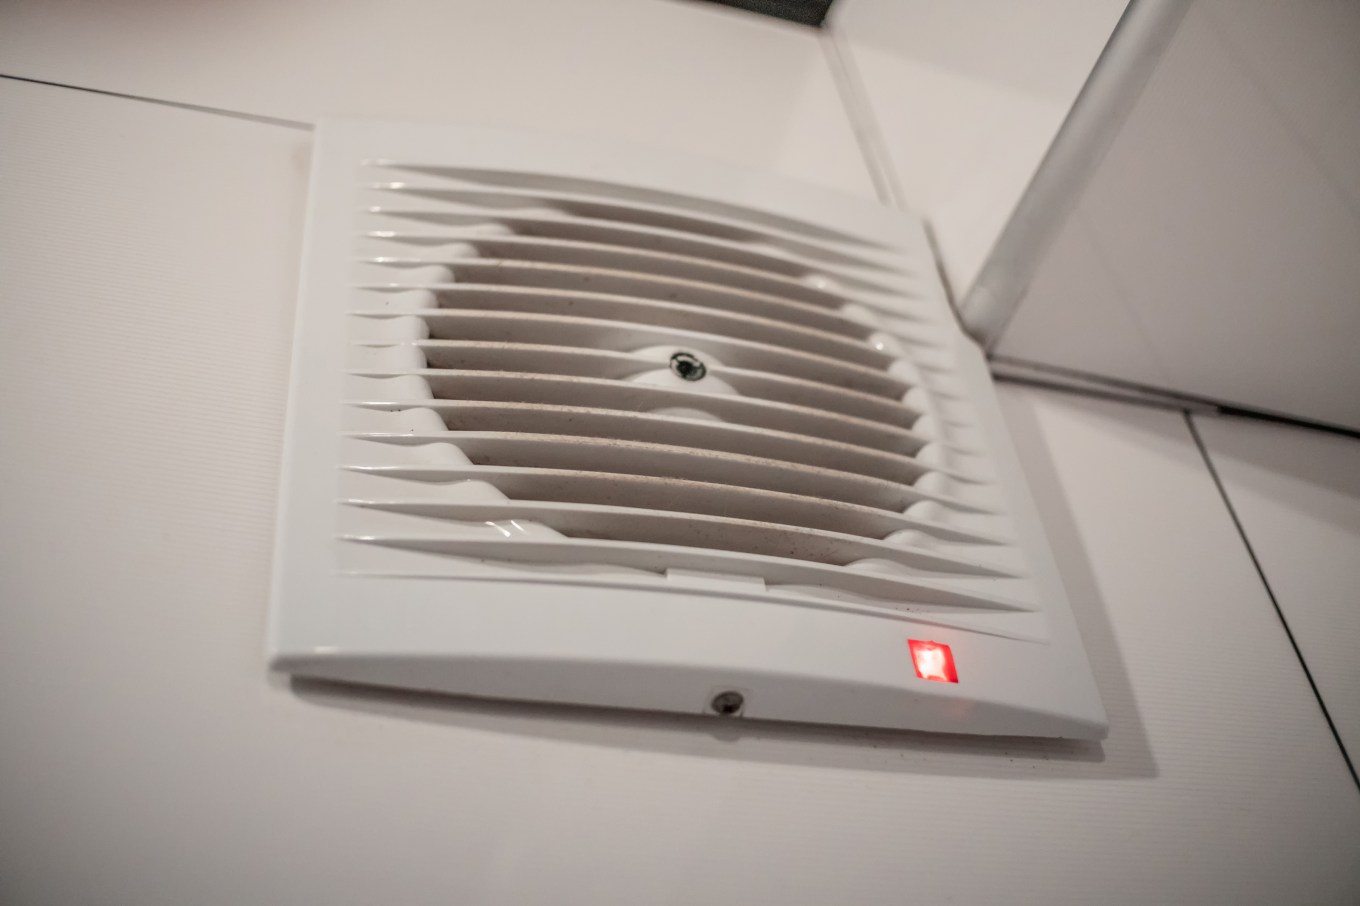 Close-up of a humidity-controlled fan with an indicator on the wall in the bathroom.